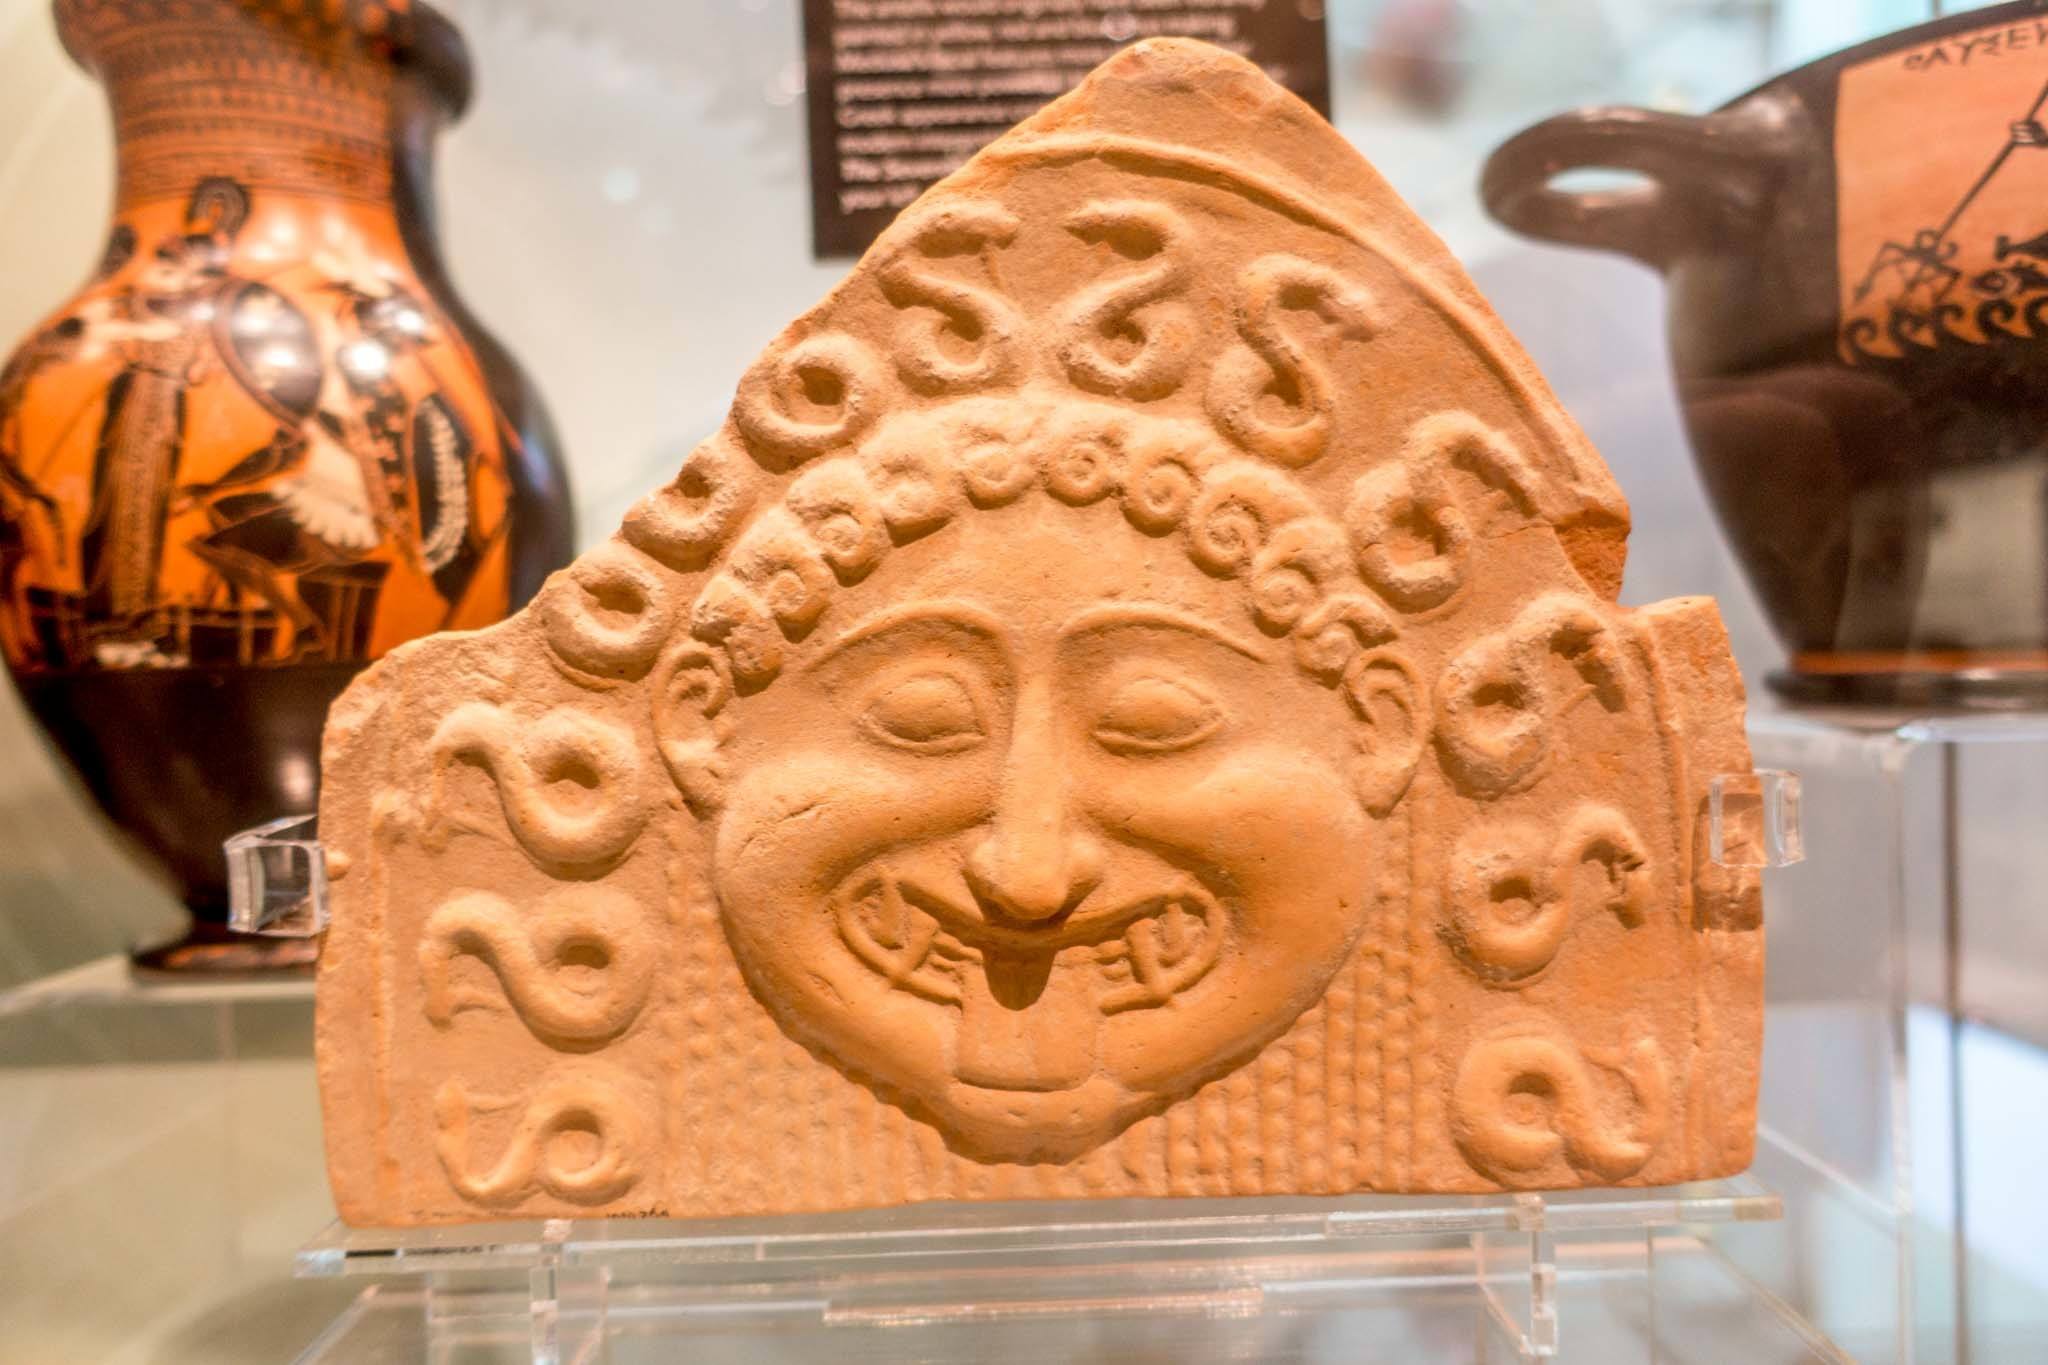 Greek pottery artifact displayed in a museum.